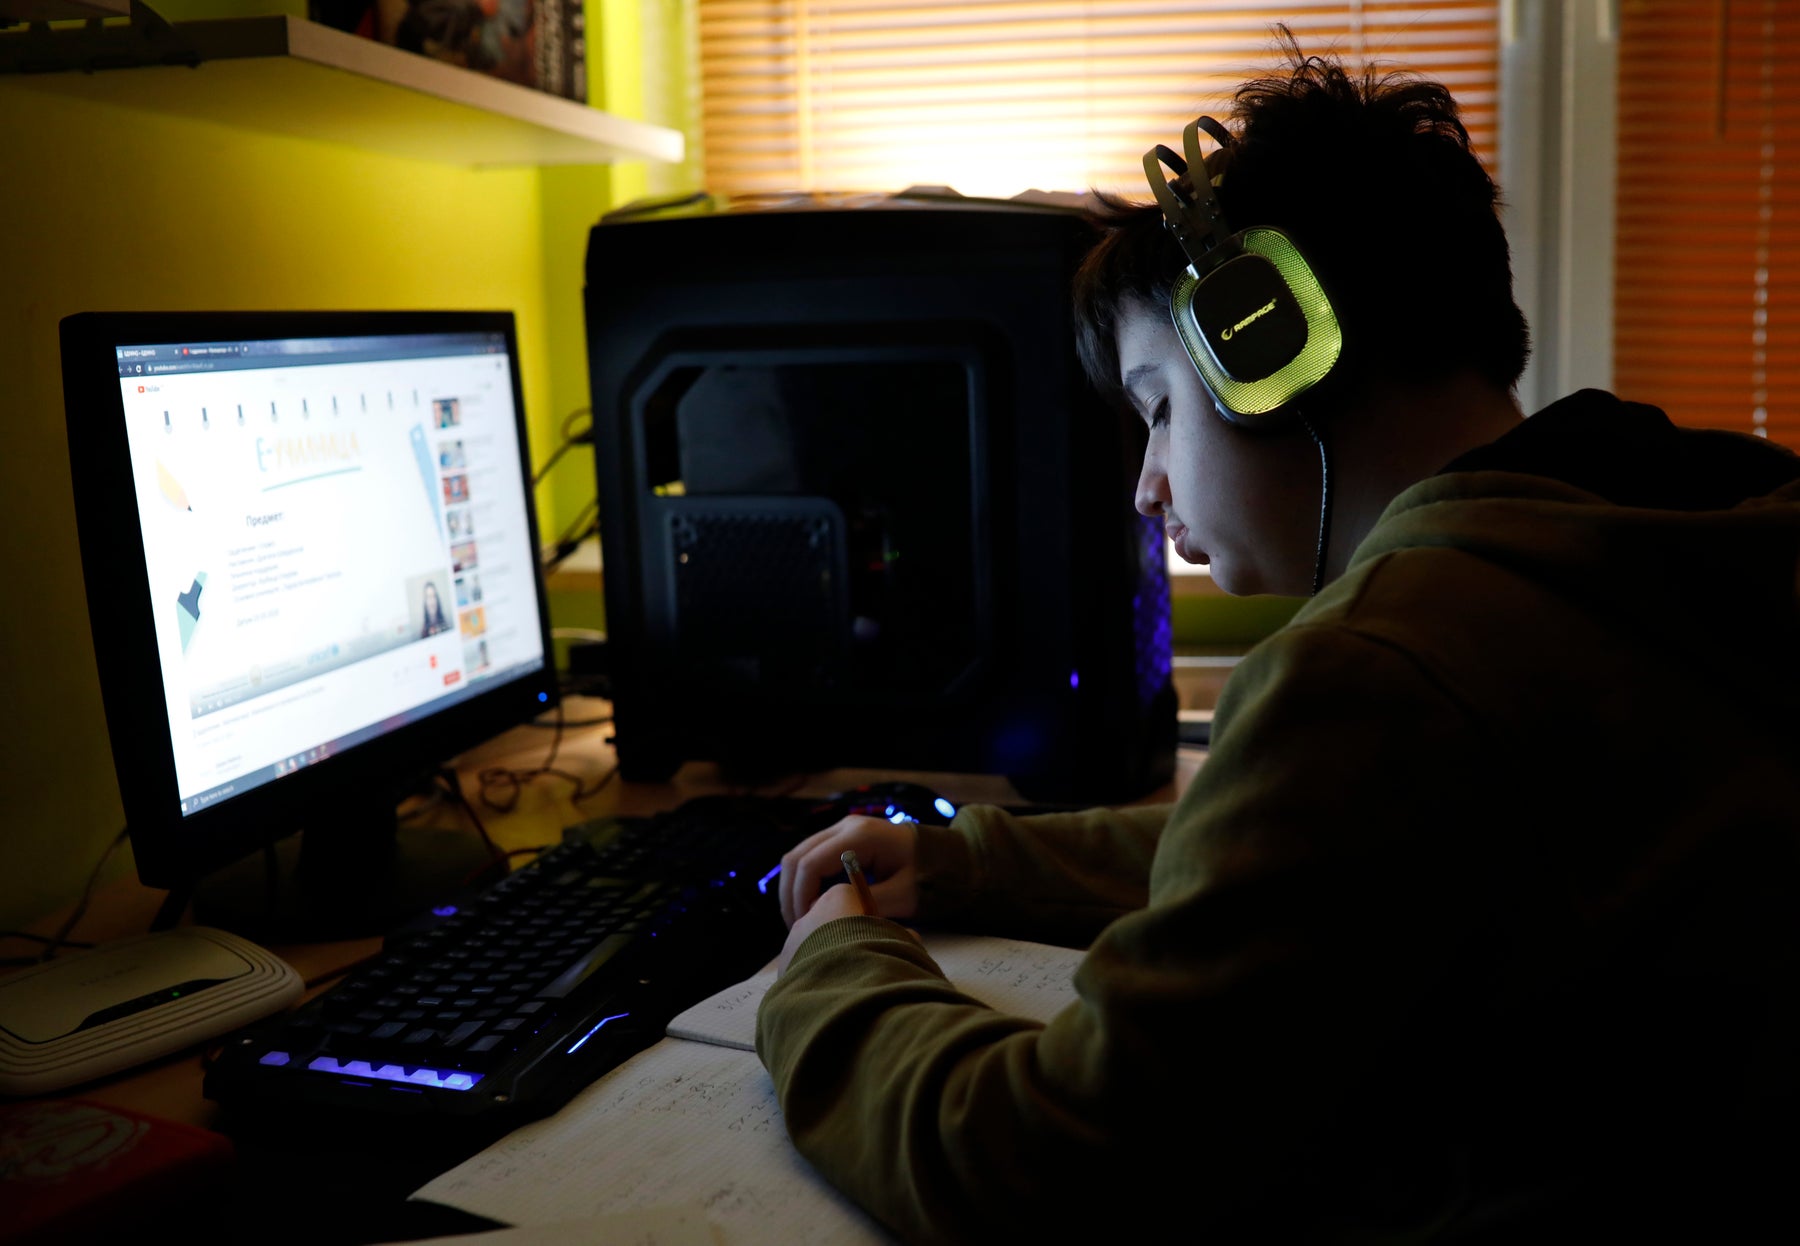 Teen boy sits at computer with headphones on